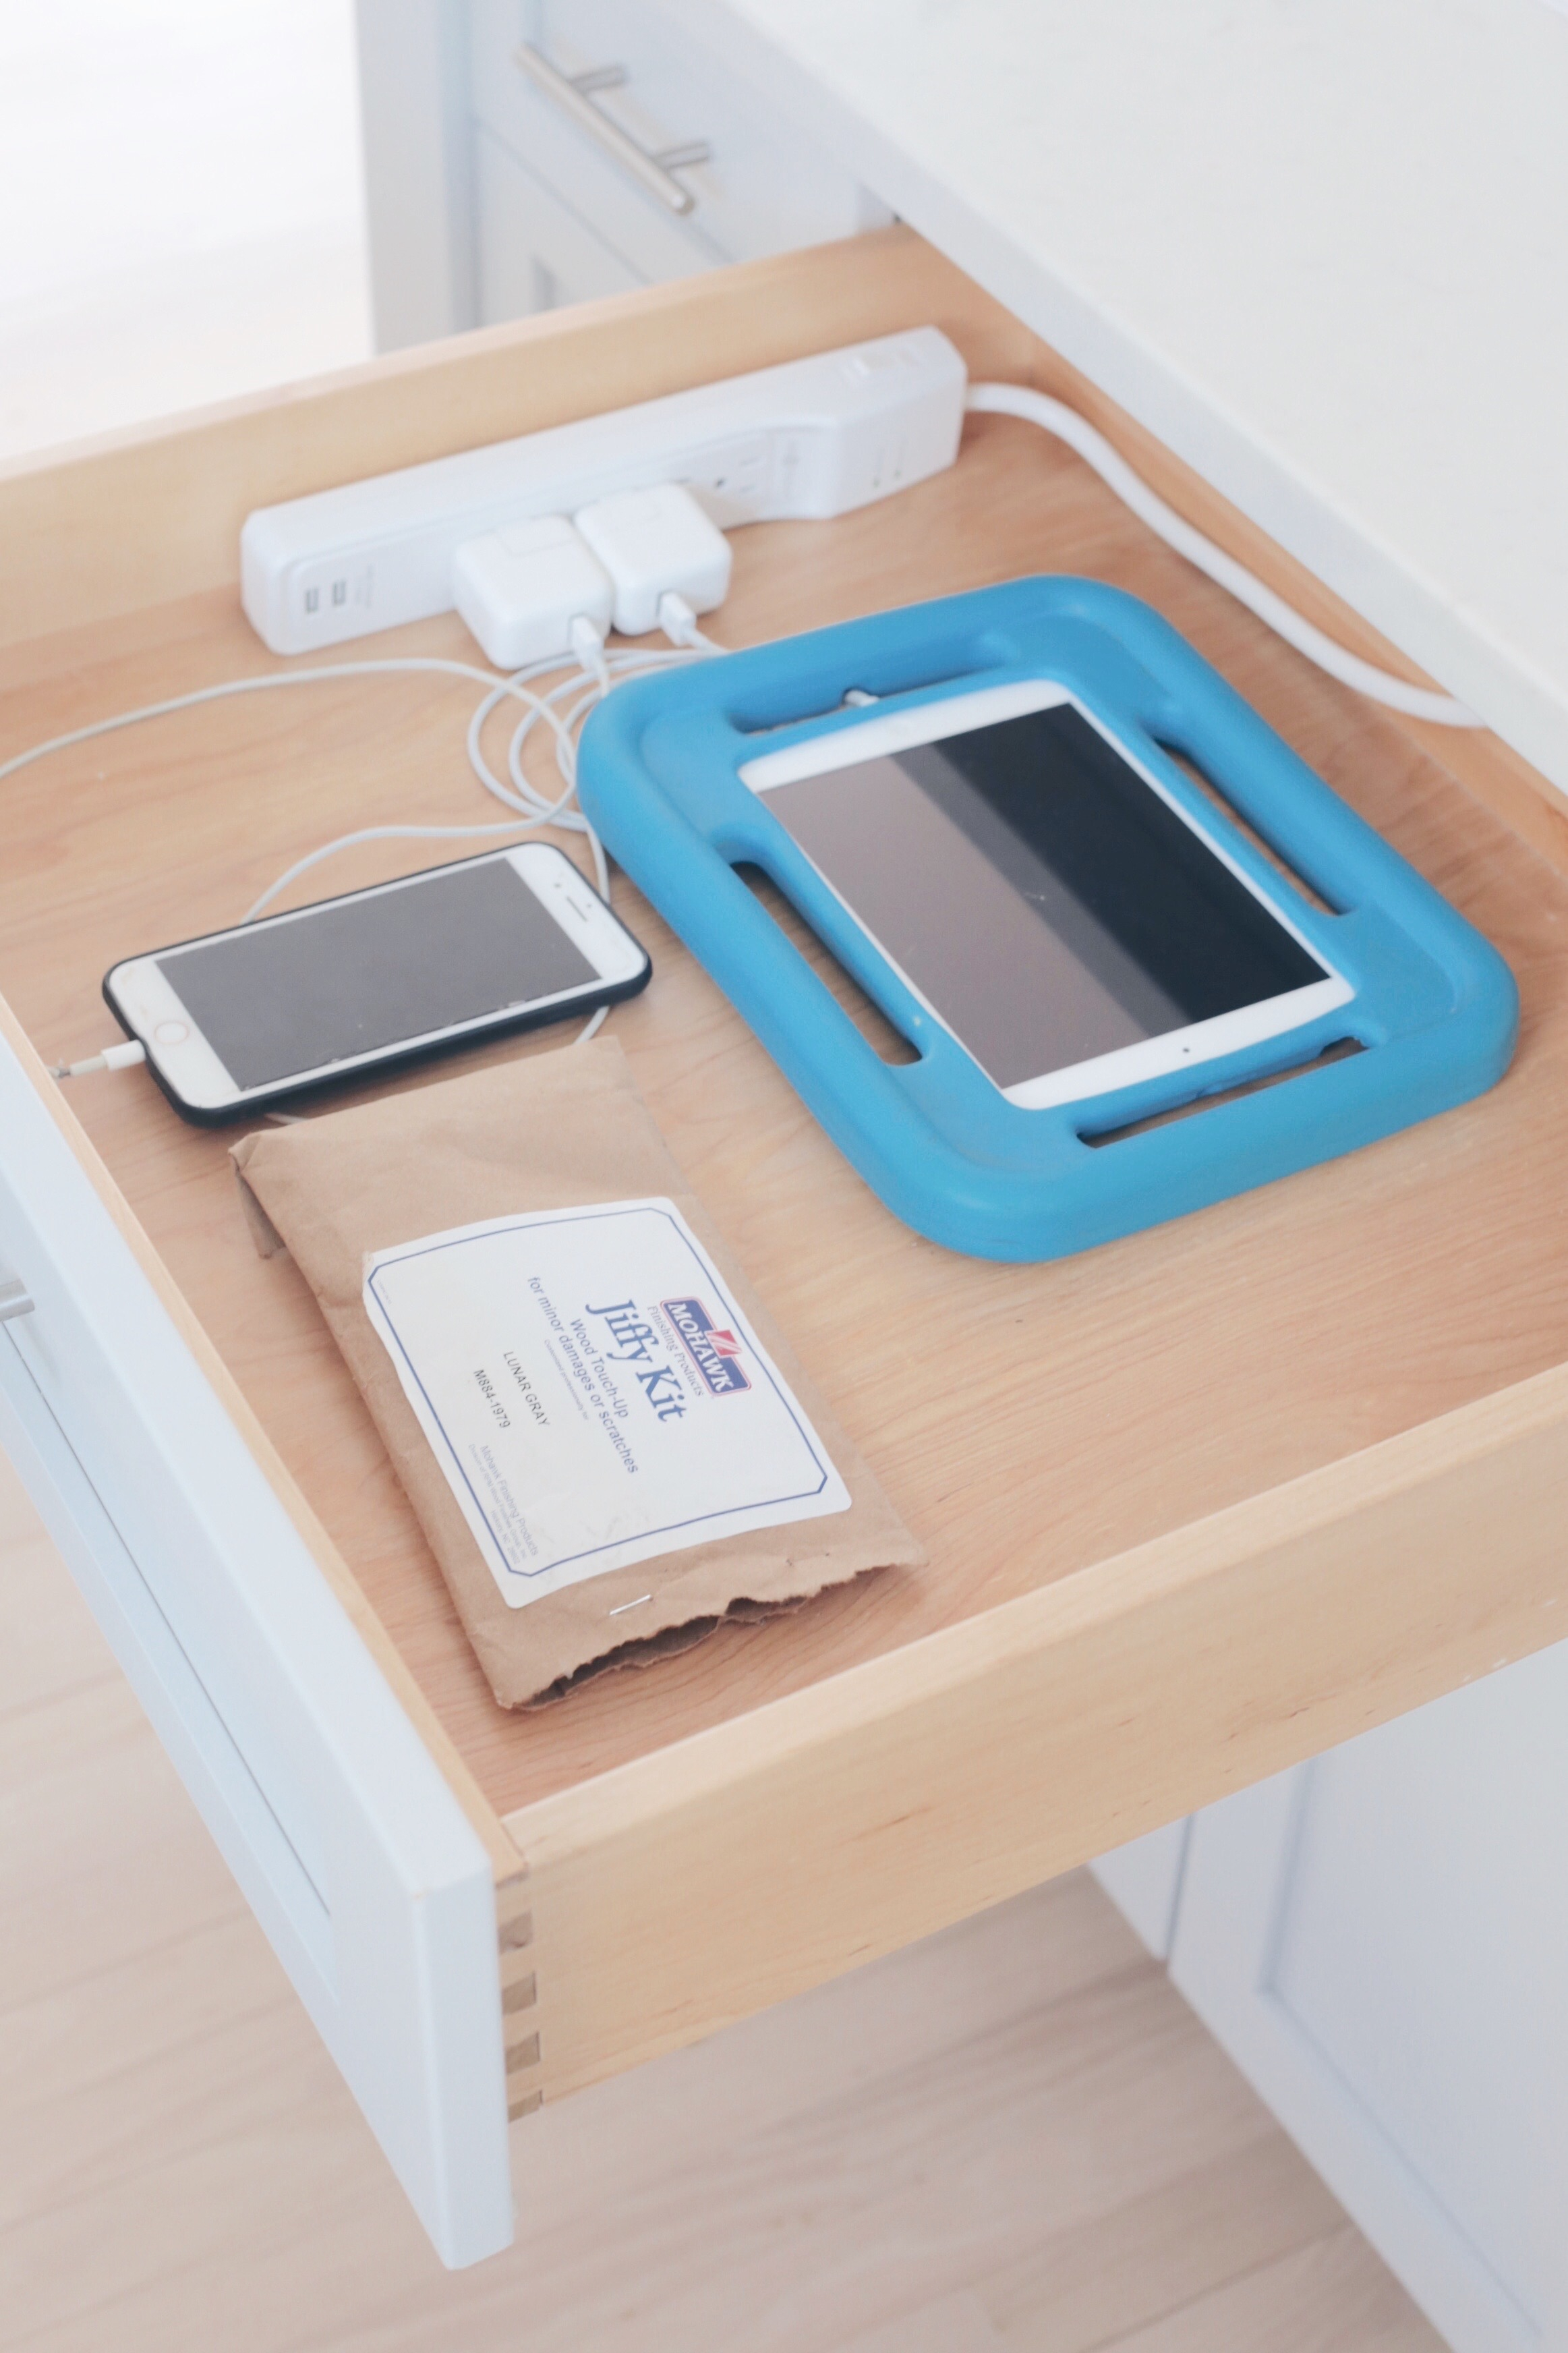 MUST READ - Number 1 tip when planning a kitchen renovation - hidden charging station